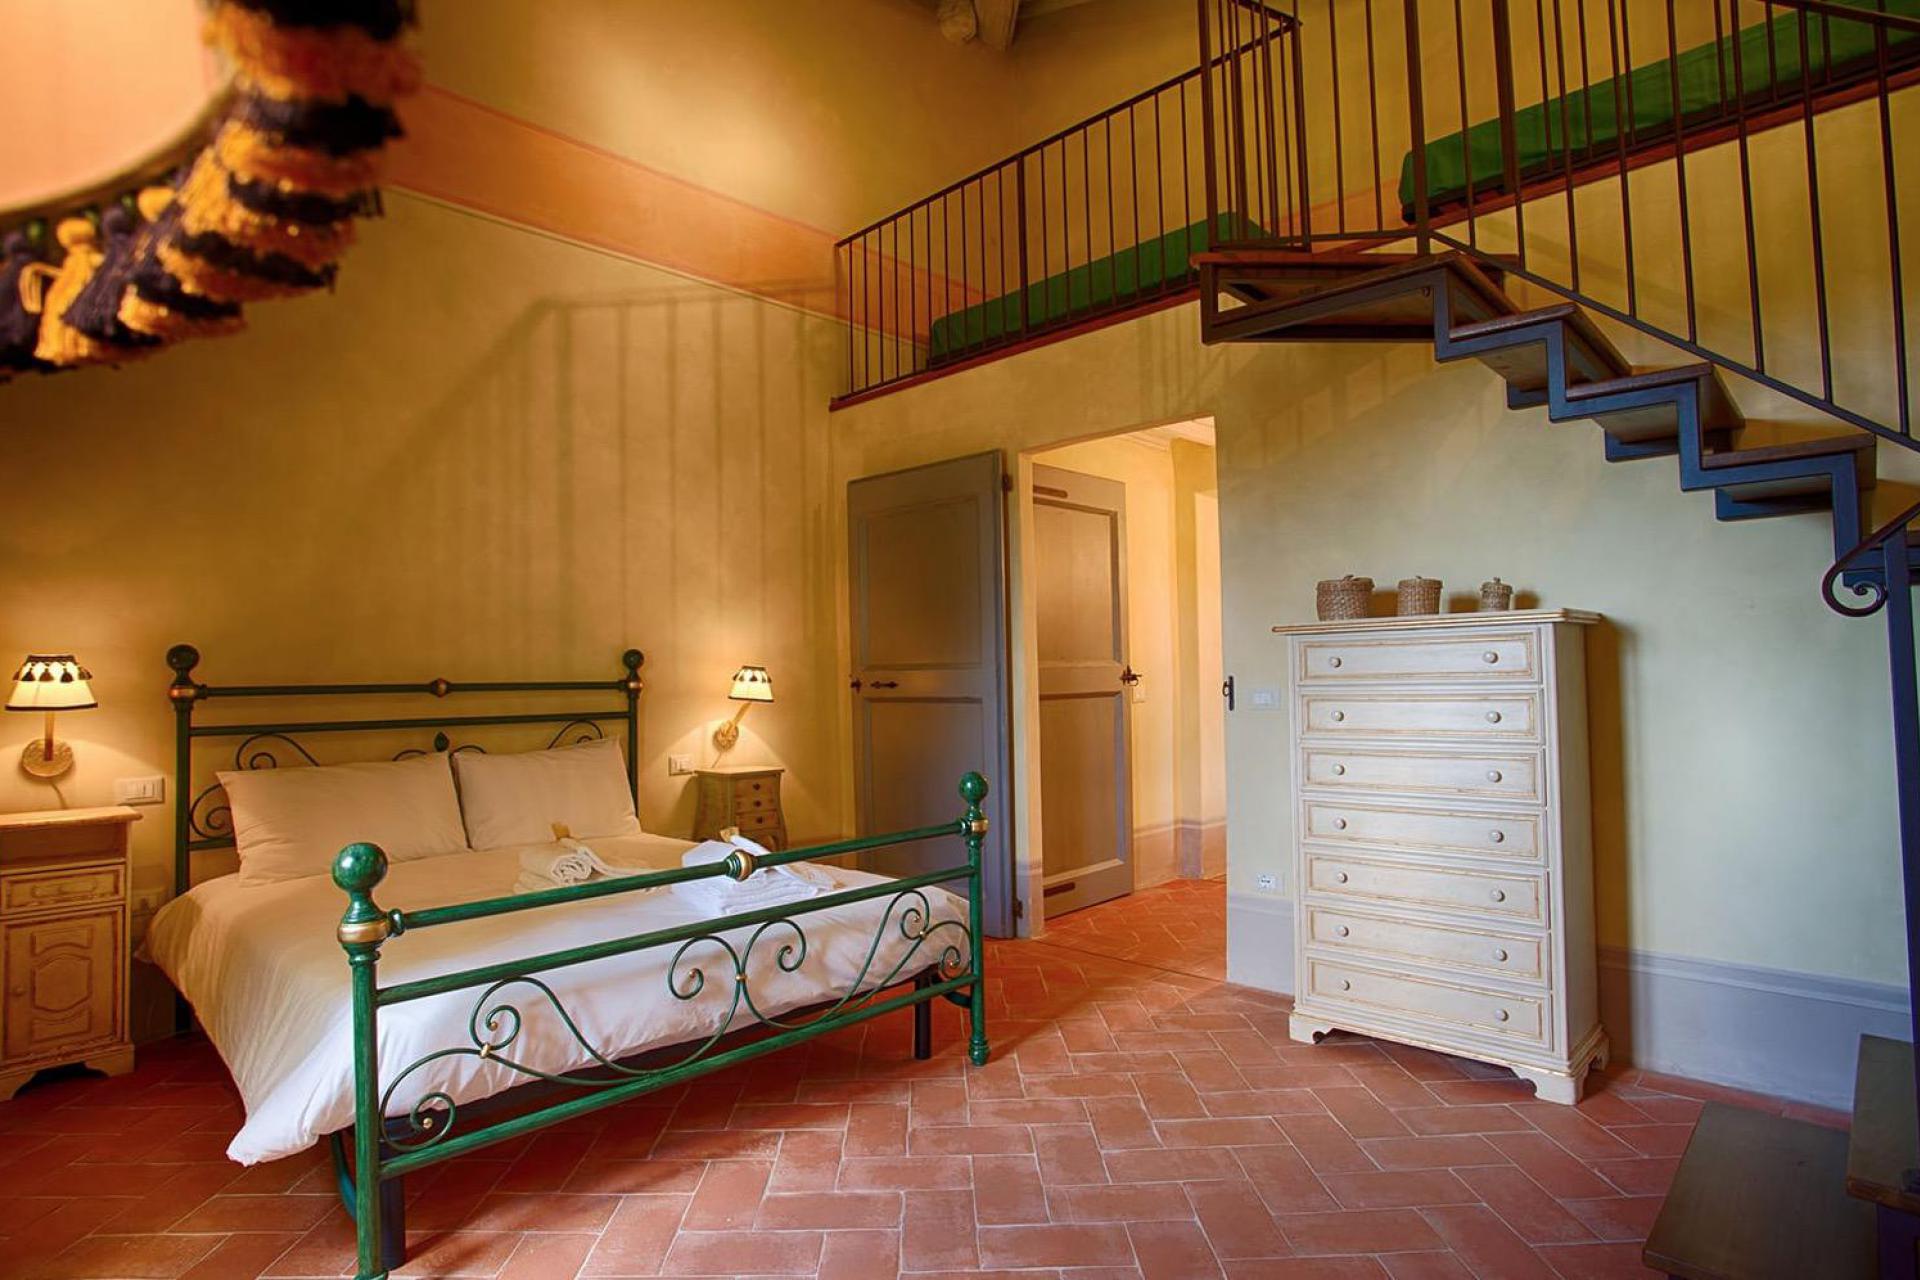 Agriturismo Tuscany Agriturismo in Tuscany within walking distance of a trattoria